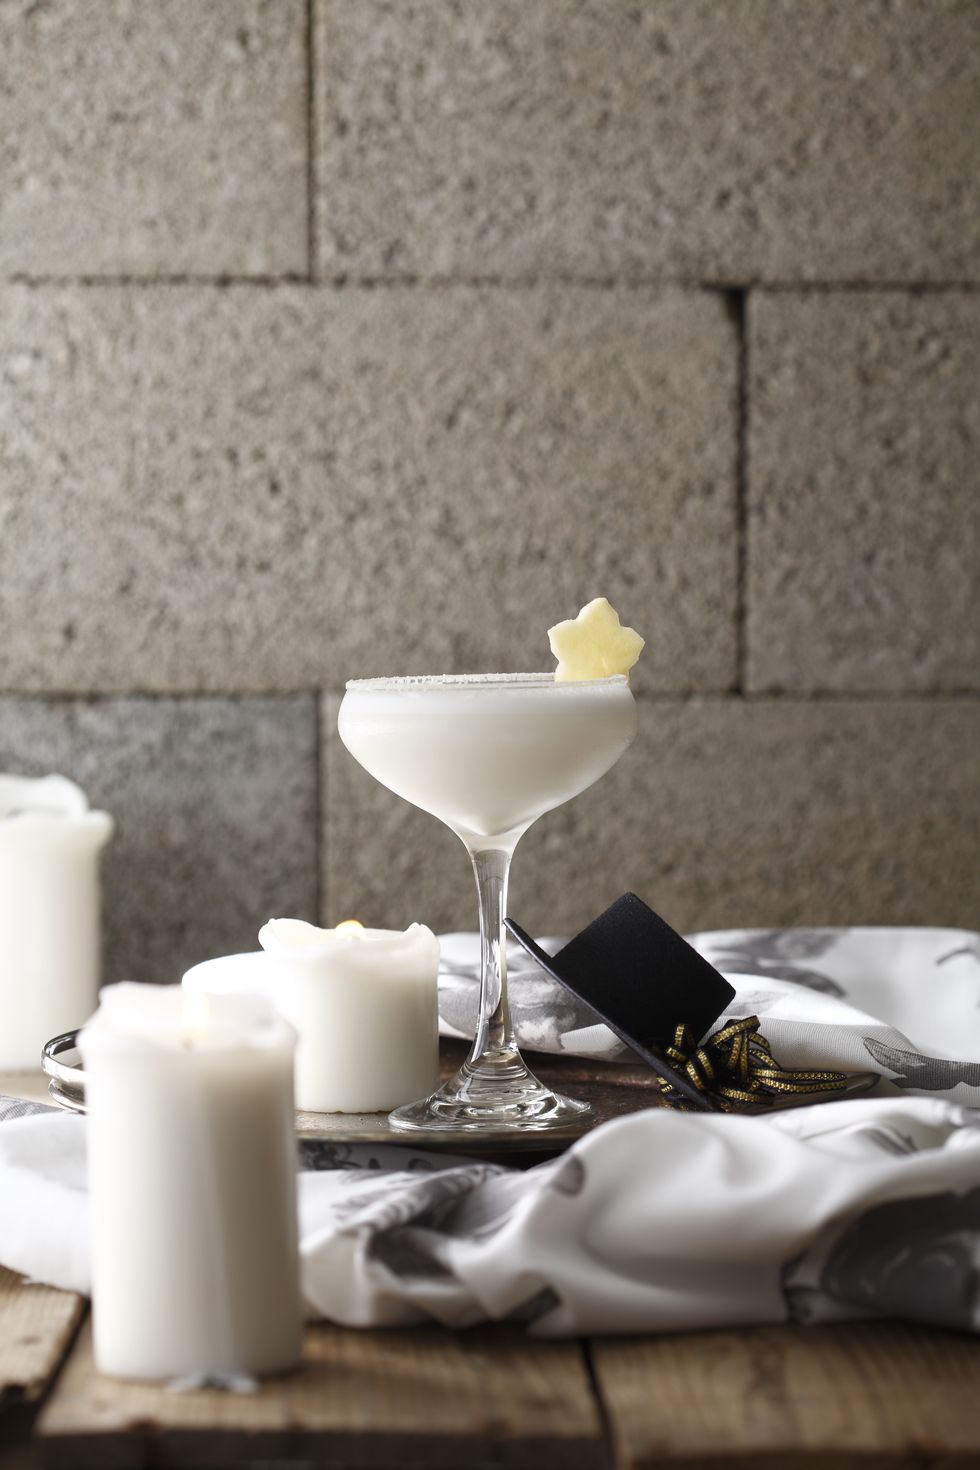 Ingredient, Serveware, Dairy, Dishware, Home accessories, Candle, Martini glass, Ceramic, Still life photography, Wax, 